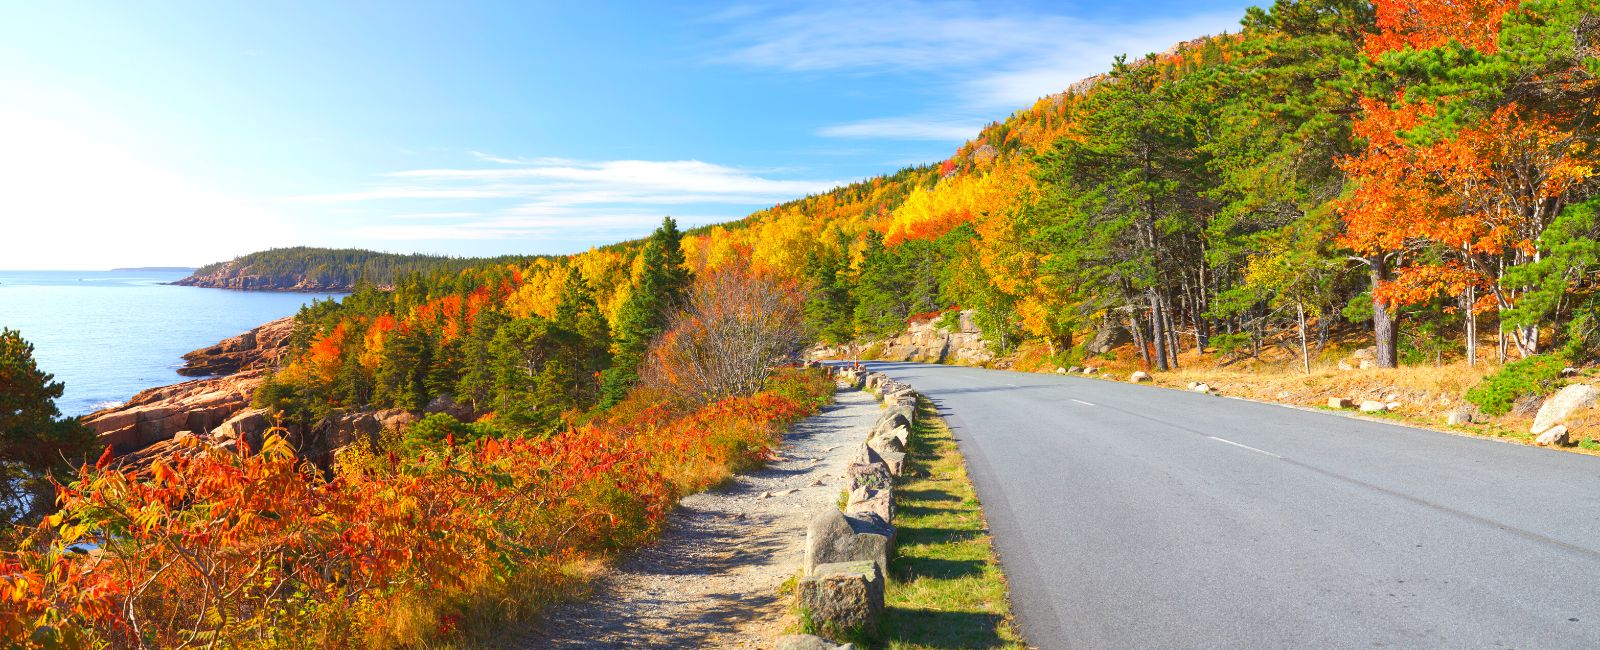 A road in autumn along the coast of Maine in Acadia National Park with the ocean to the left and surrounded by trees turned orange and yellow